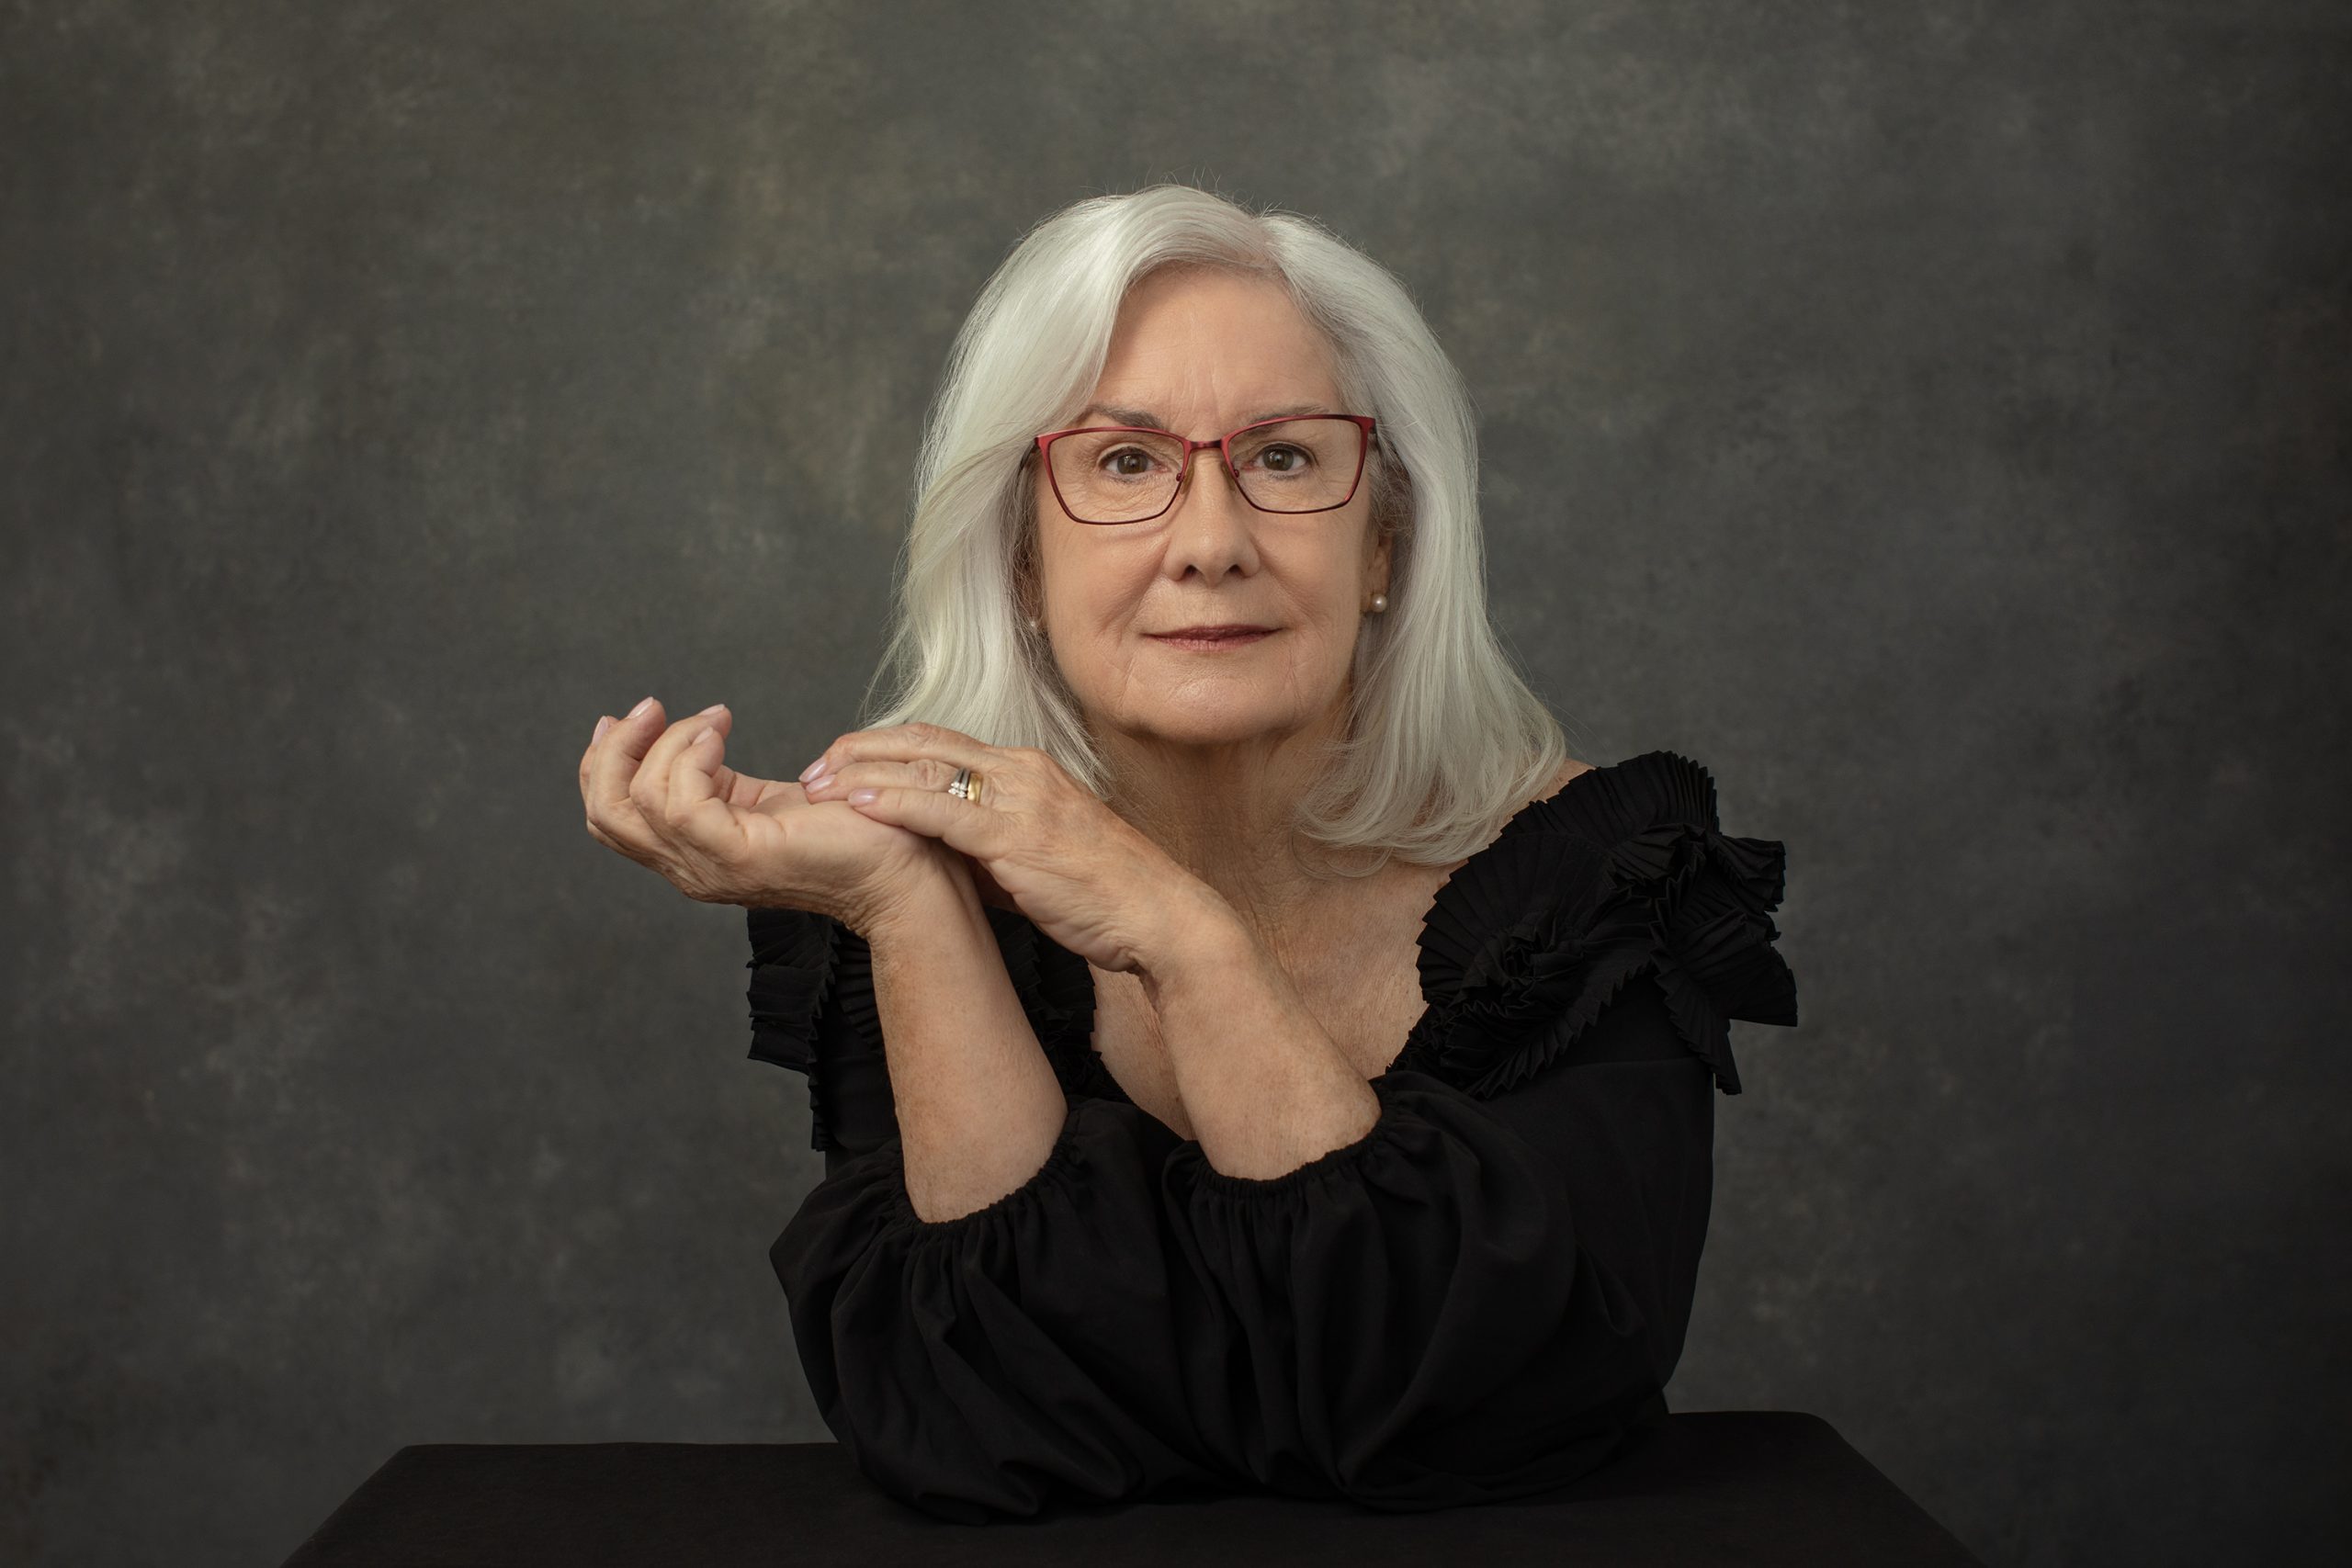 A stylish woman in her 70s, seated with her hands by her face